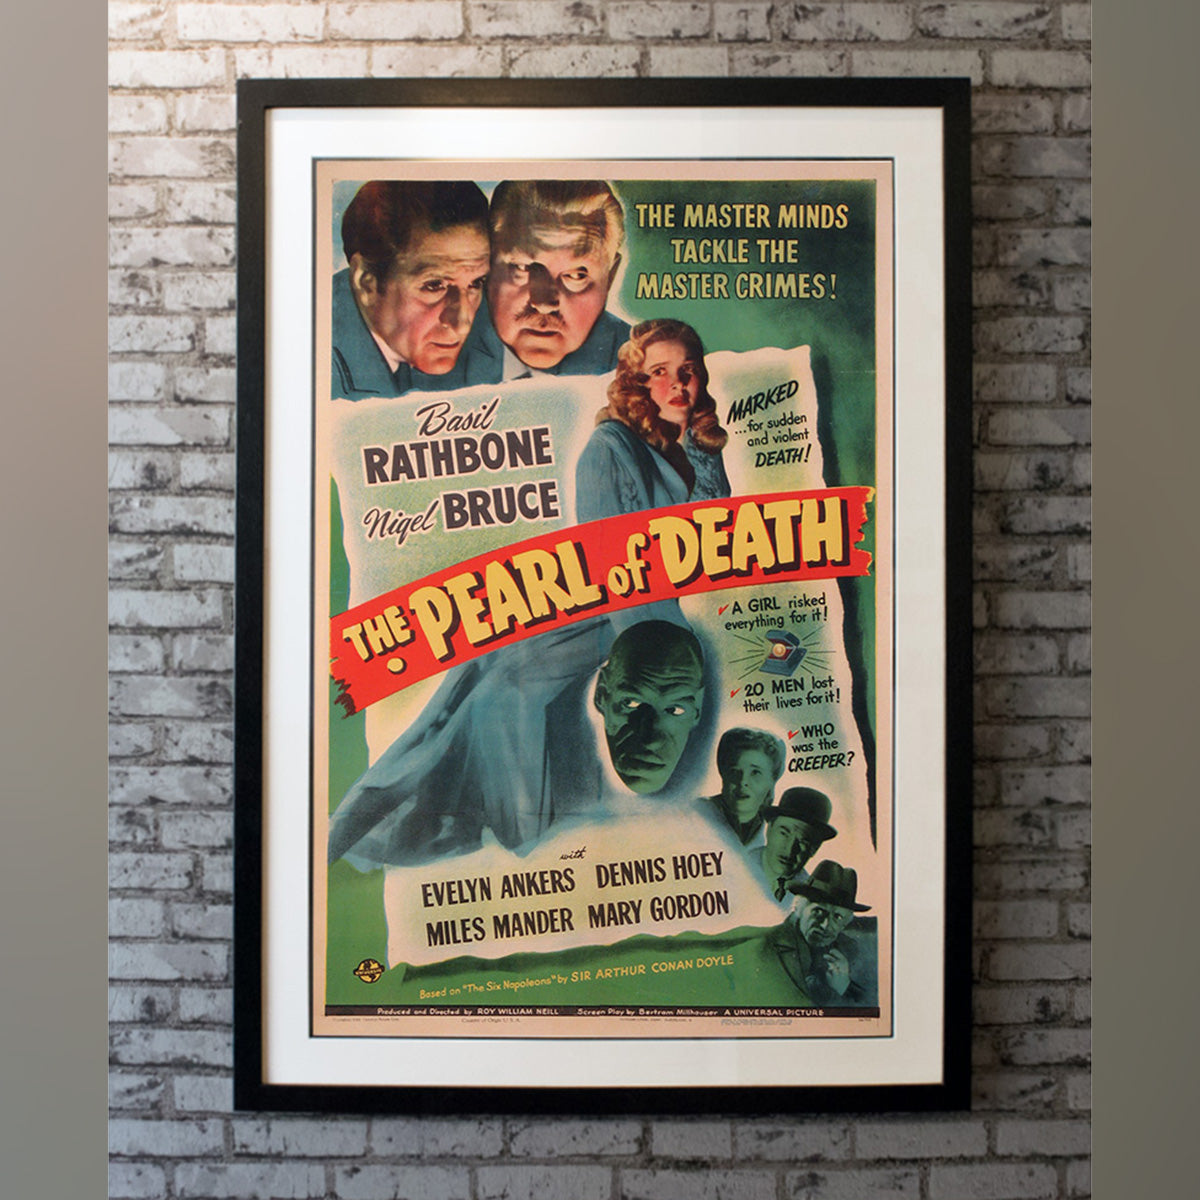 Original Movie Poster of Pearl Of Death, The (1944)